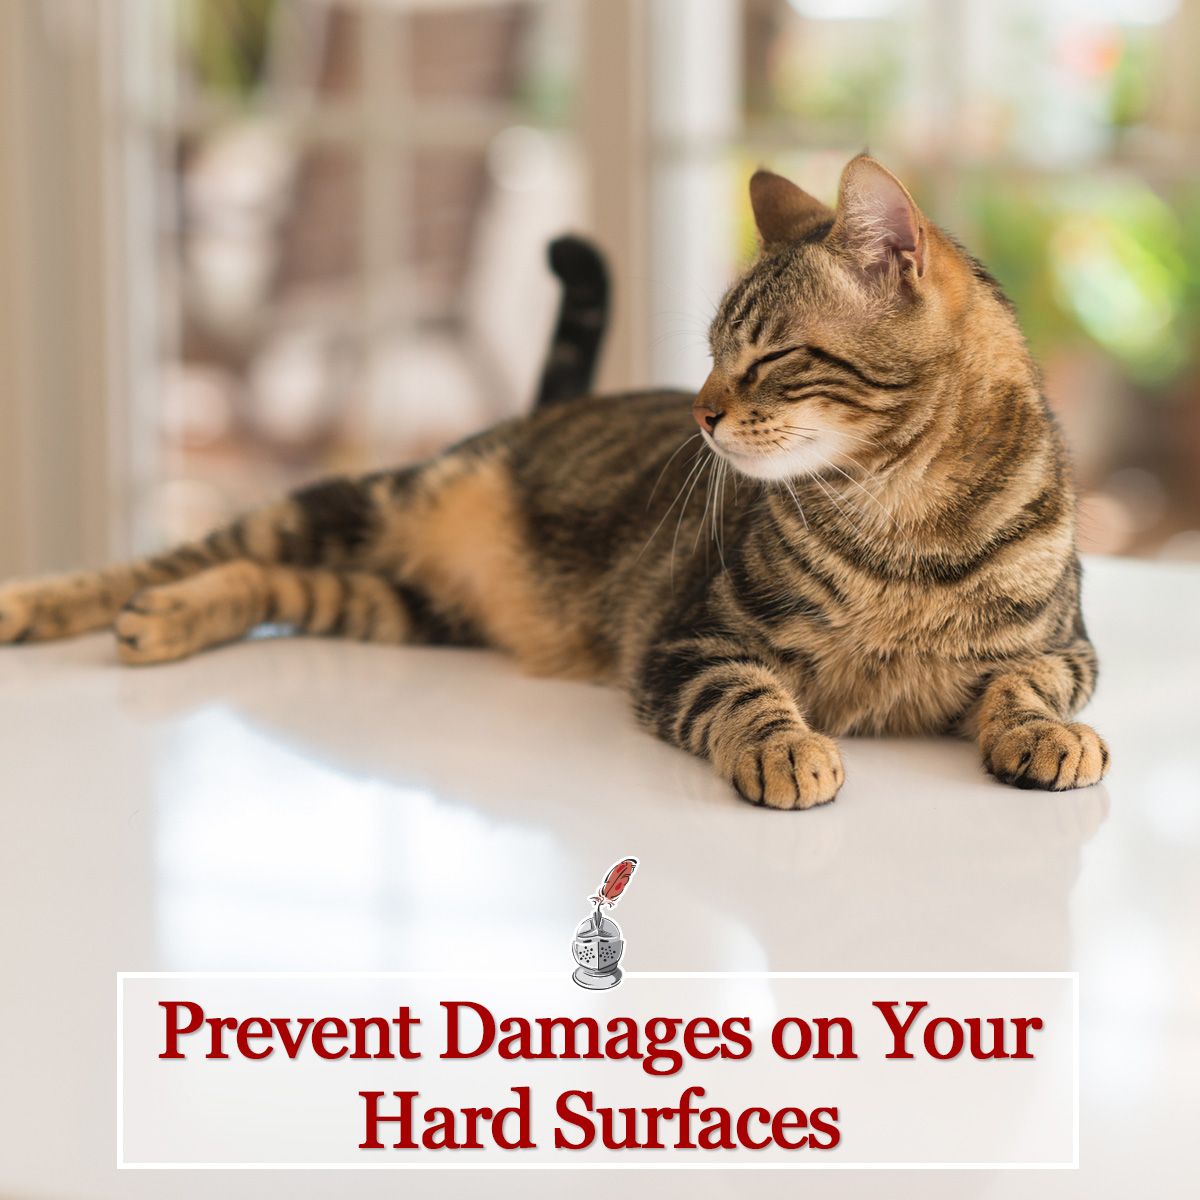 Prevent Damages on Your Hard Surfaces